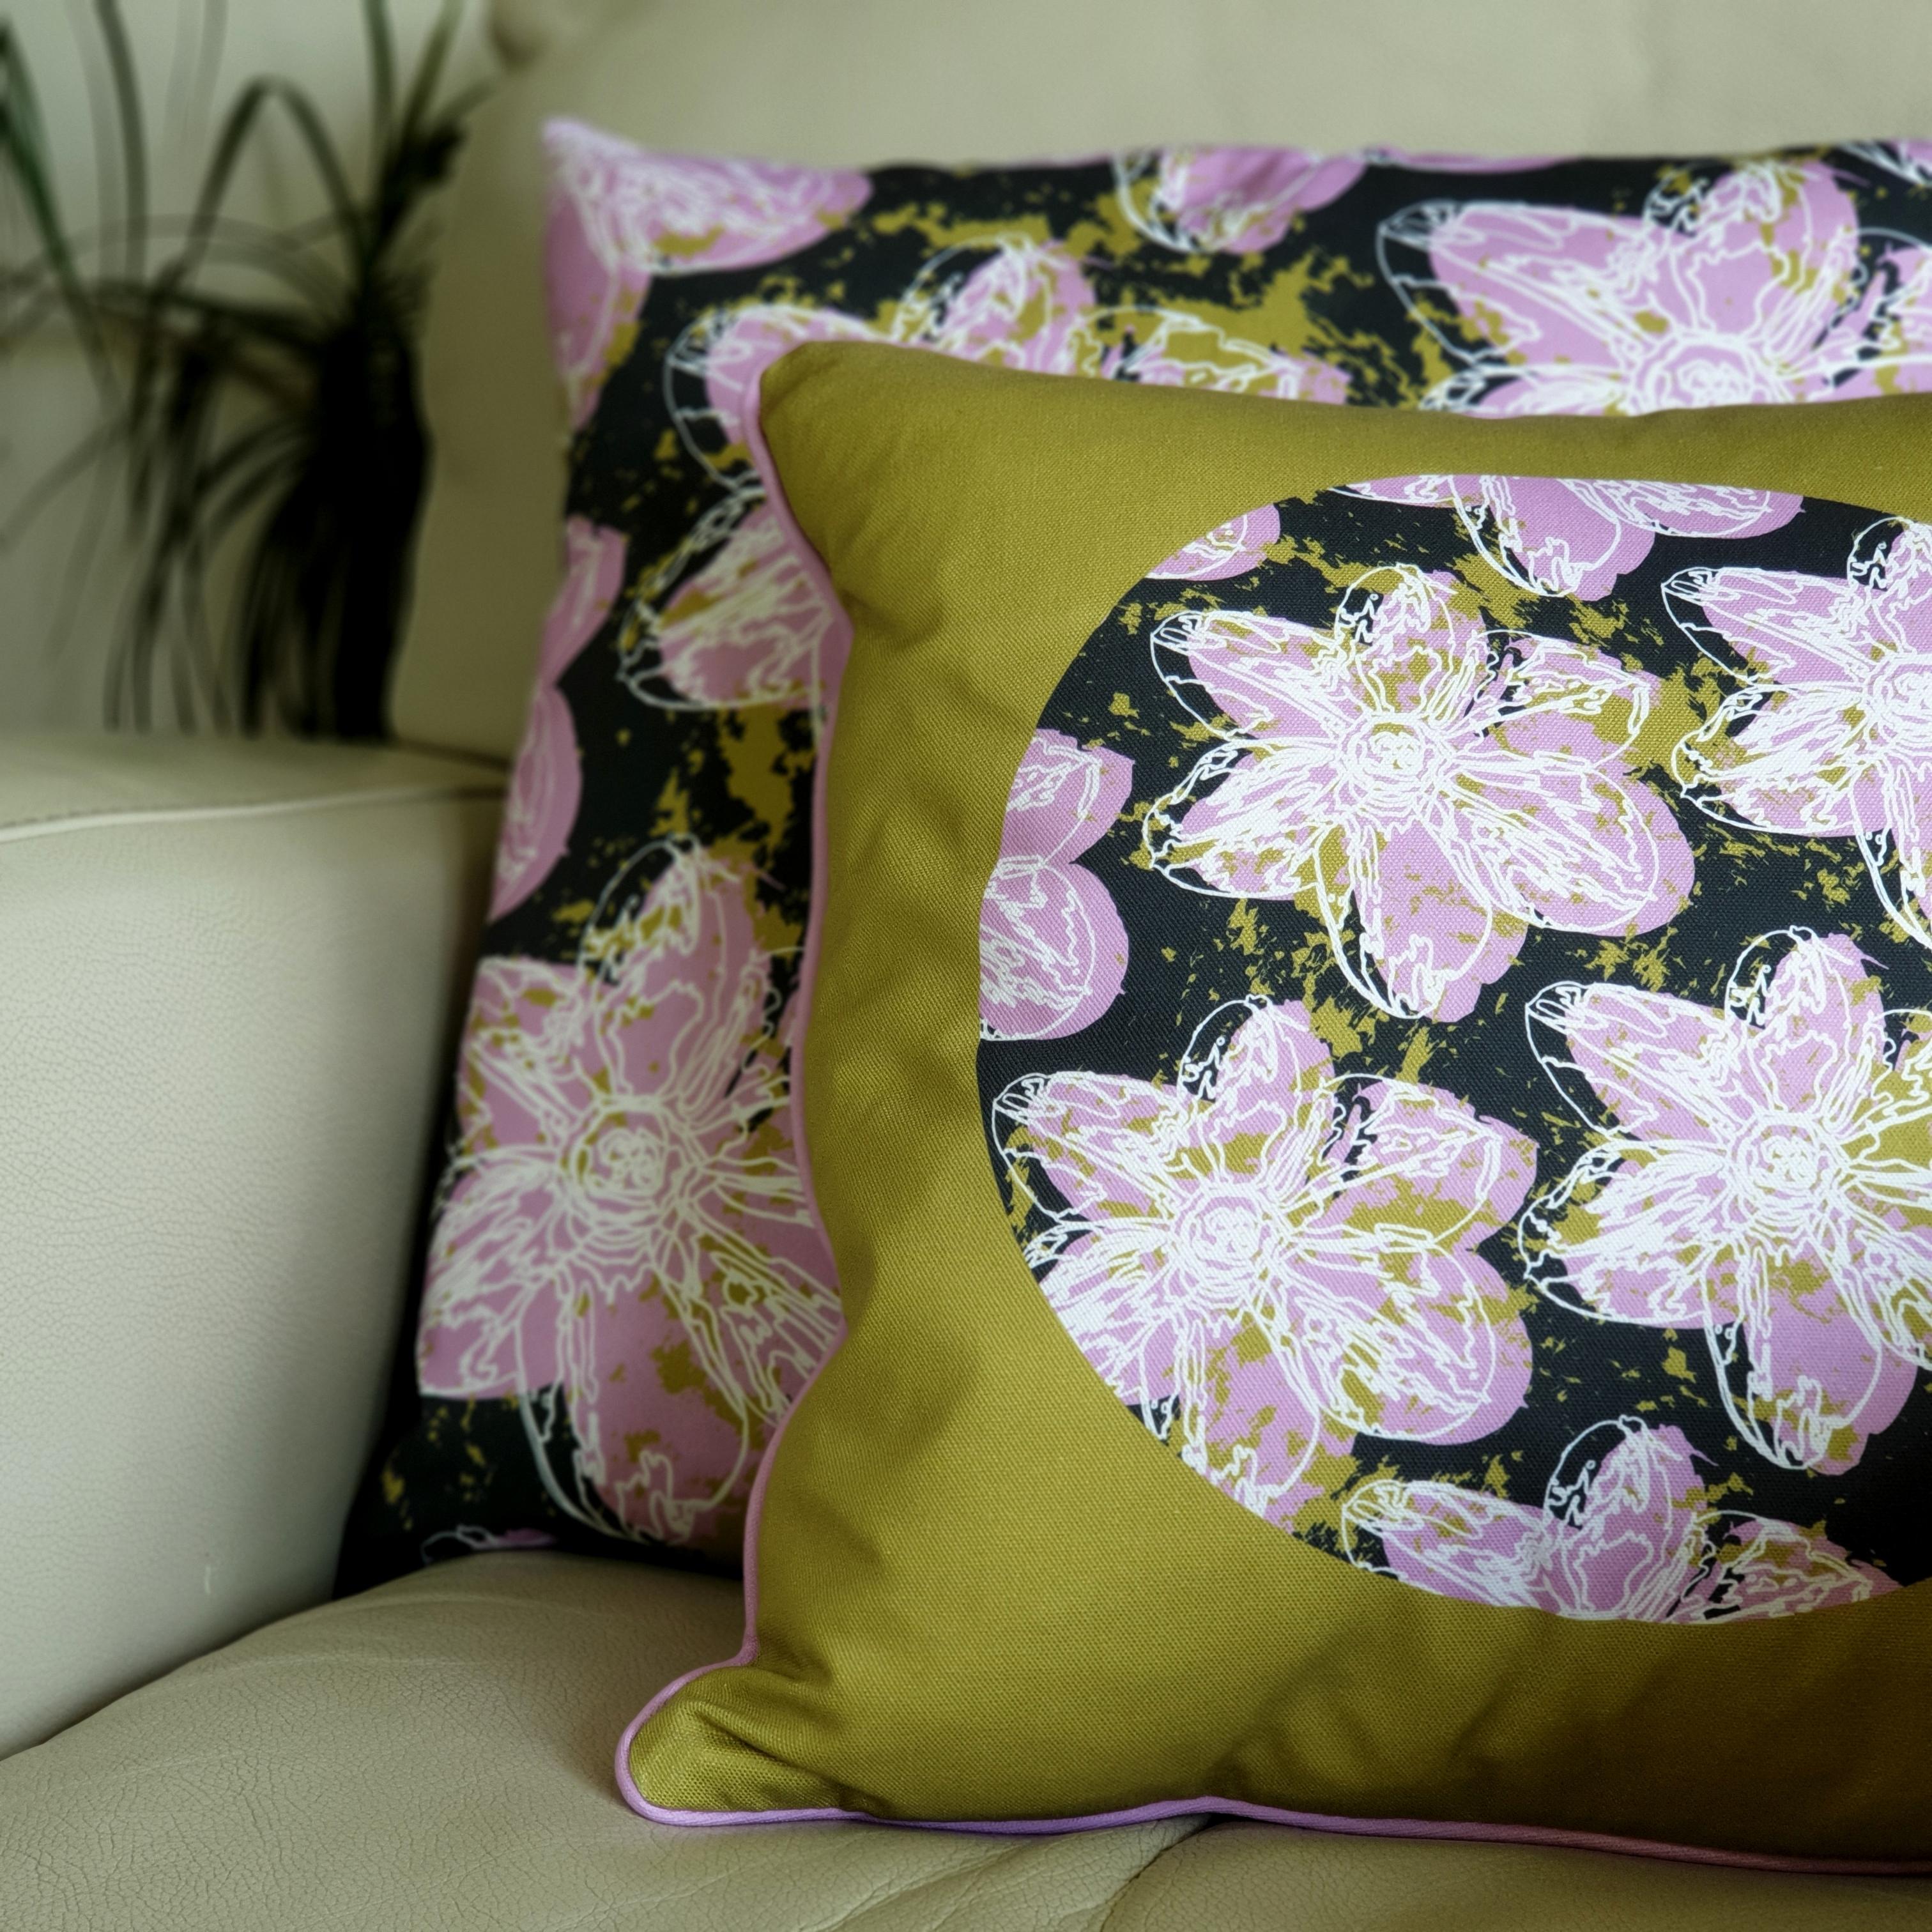 Double-sided 45cm square & 51cm square Flower Splash cushions, showing both sides, designed by thetinkan. Candy pink narcissus flower with white traced outline set within a dark charcoal grey background with olive green paint splashes. Available with an optional luxury cushion inner pad. VIEW PRODUCT >>